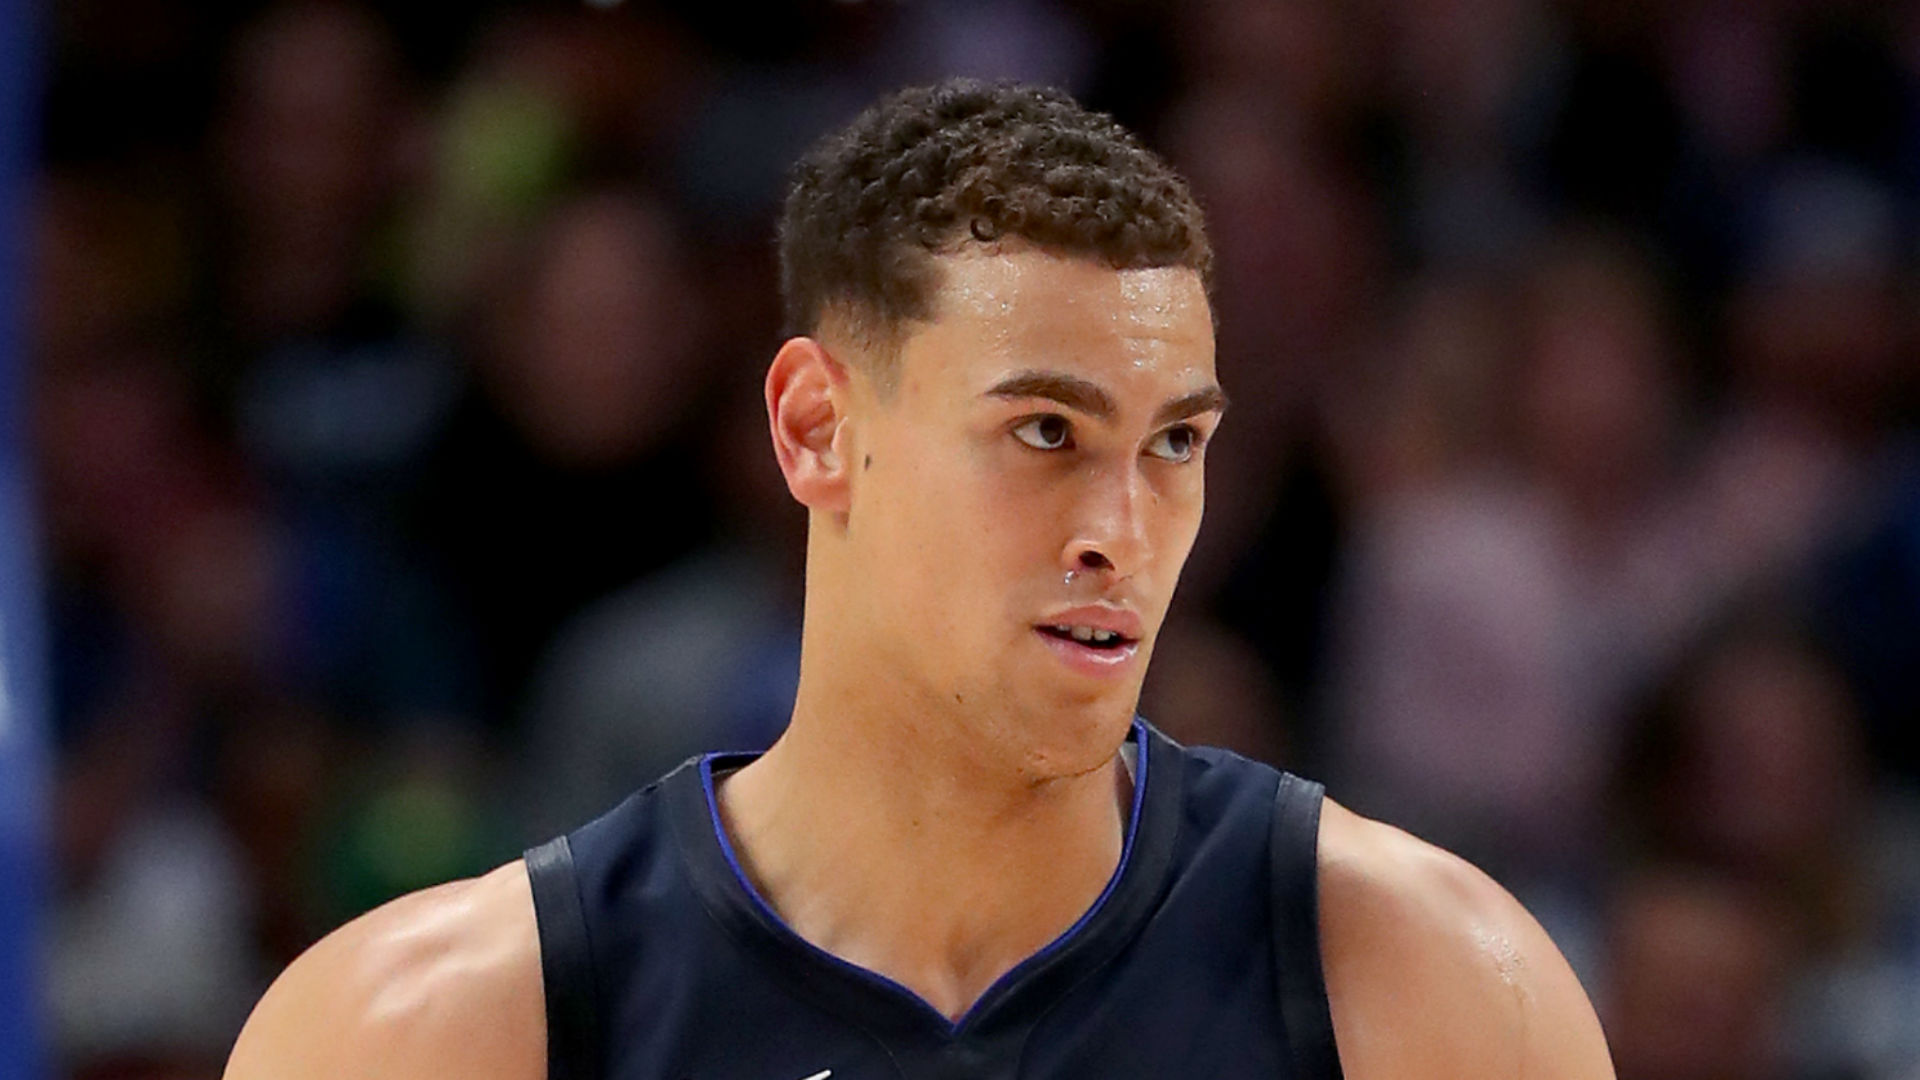 A prolonged spell on the sidelines awaits Dwight Powell after he ruptured his Achilles in the Mavs' loss to the Clippers on Tuesday.